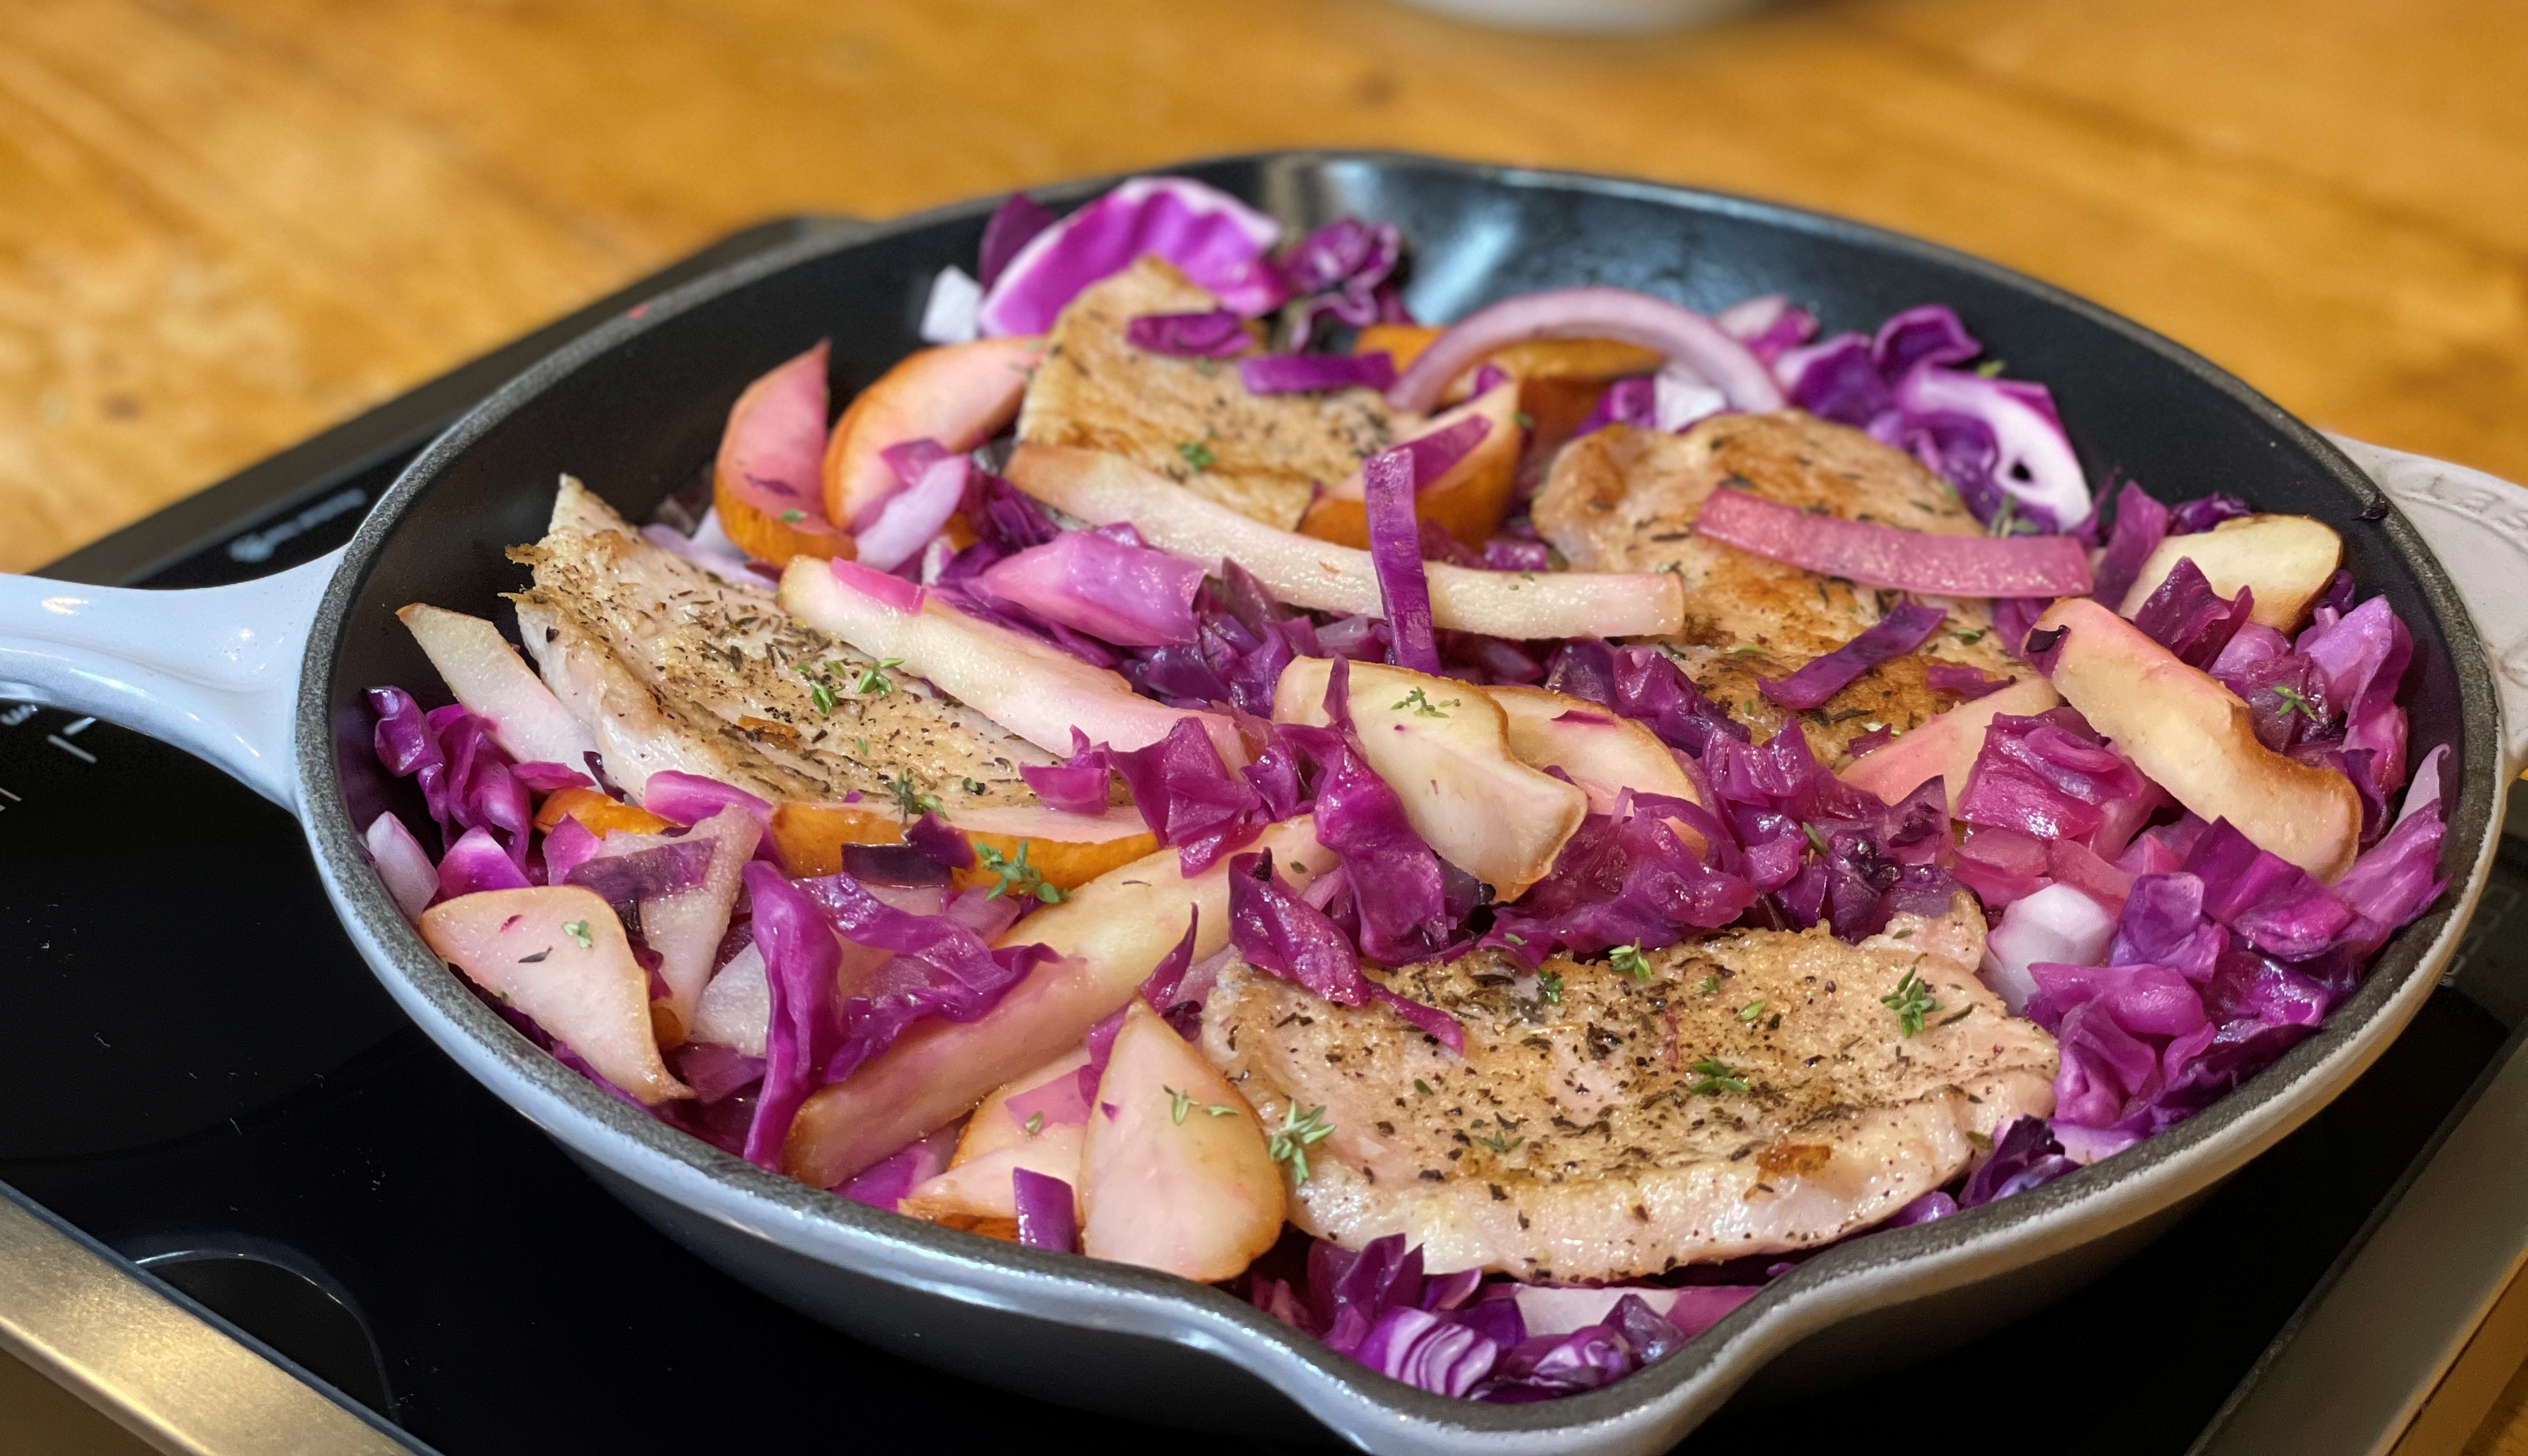 Pork chops, red cabbage and pears in a skillet sitting on a wooden table.